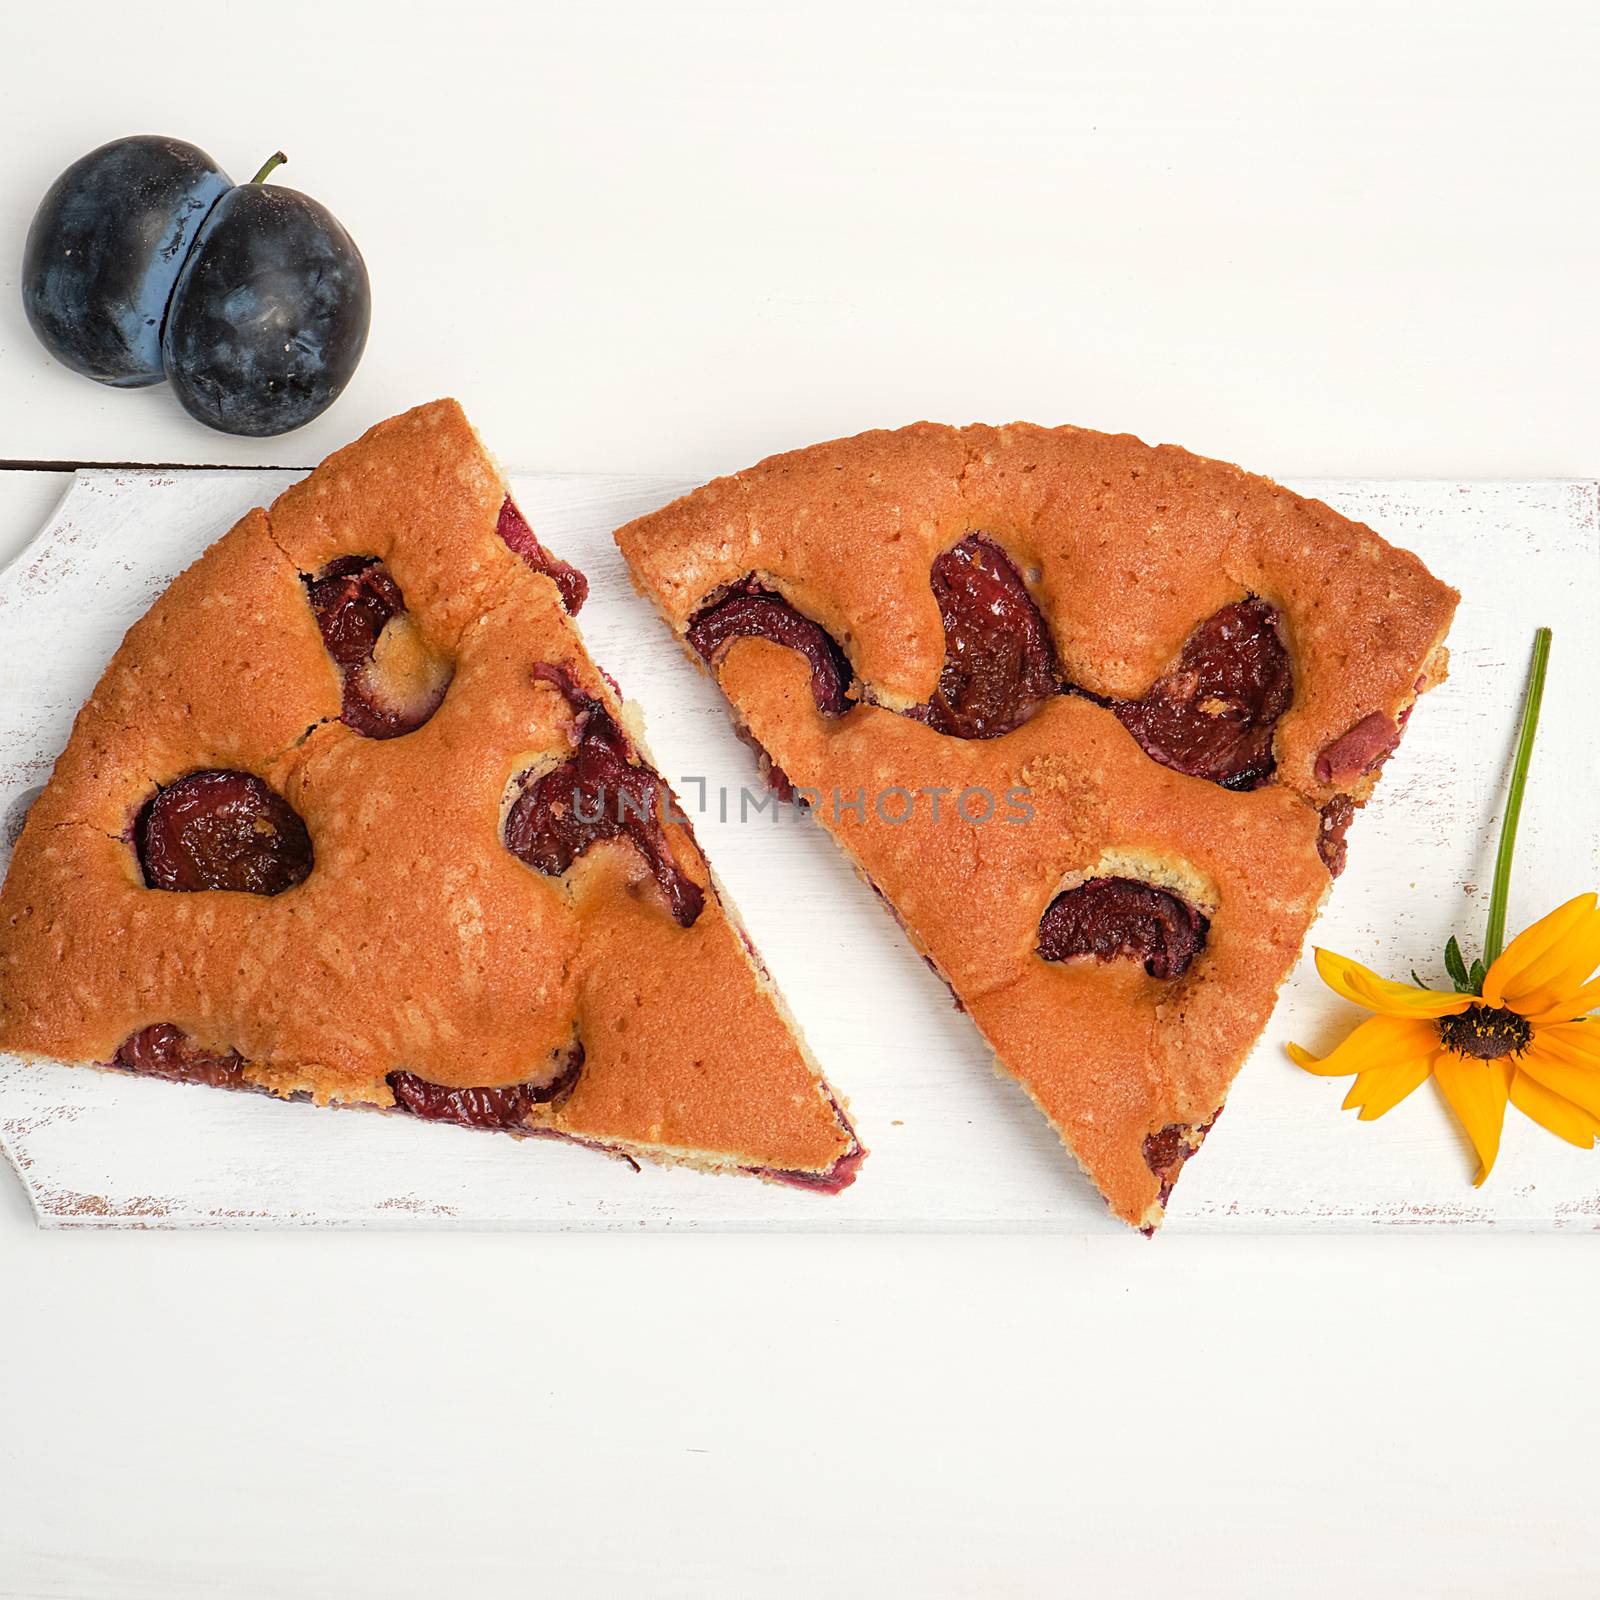 slices of biscuit plum cake on a white wooden board and fresh fruits, top view